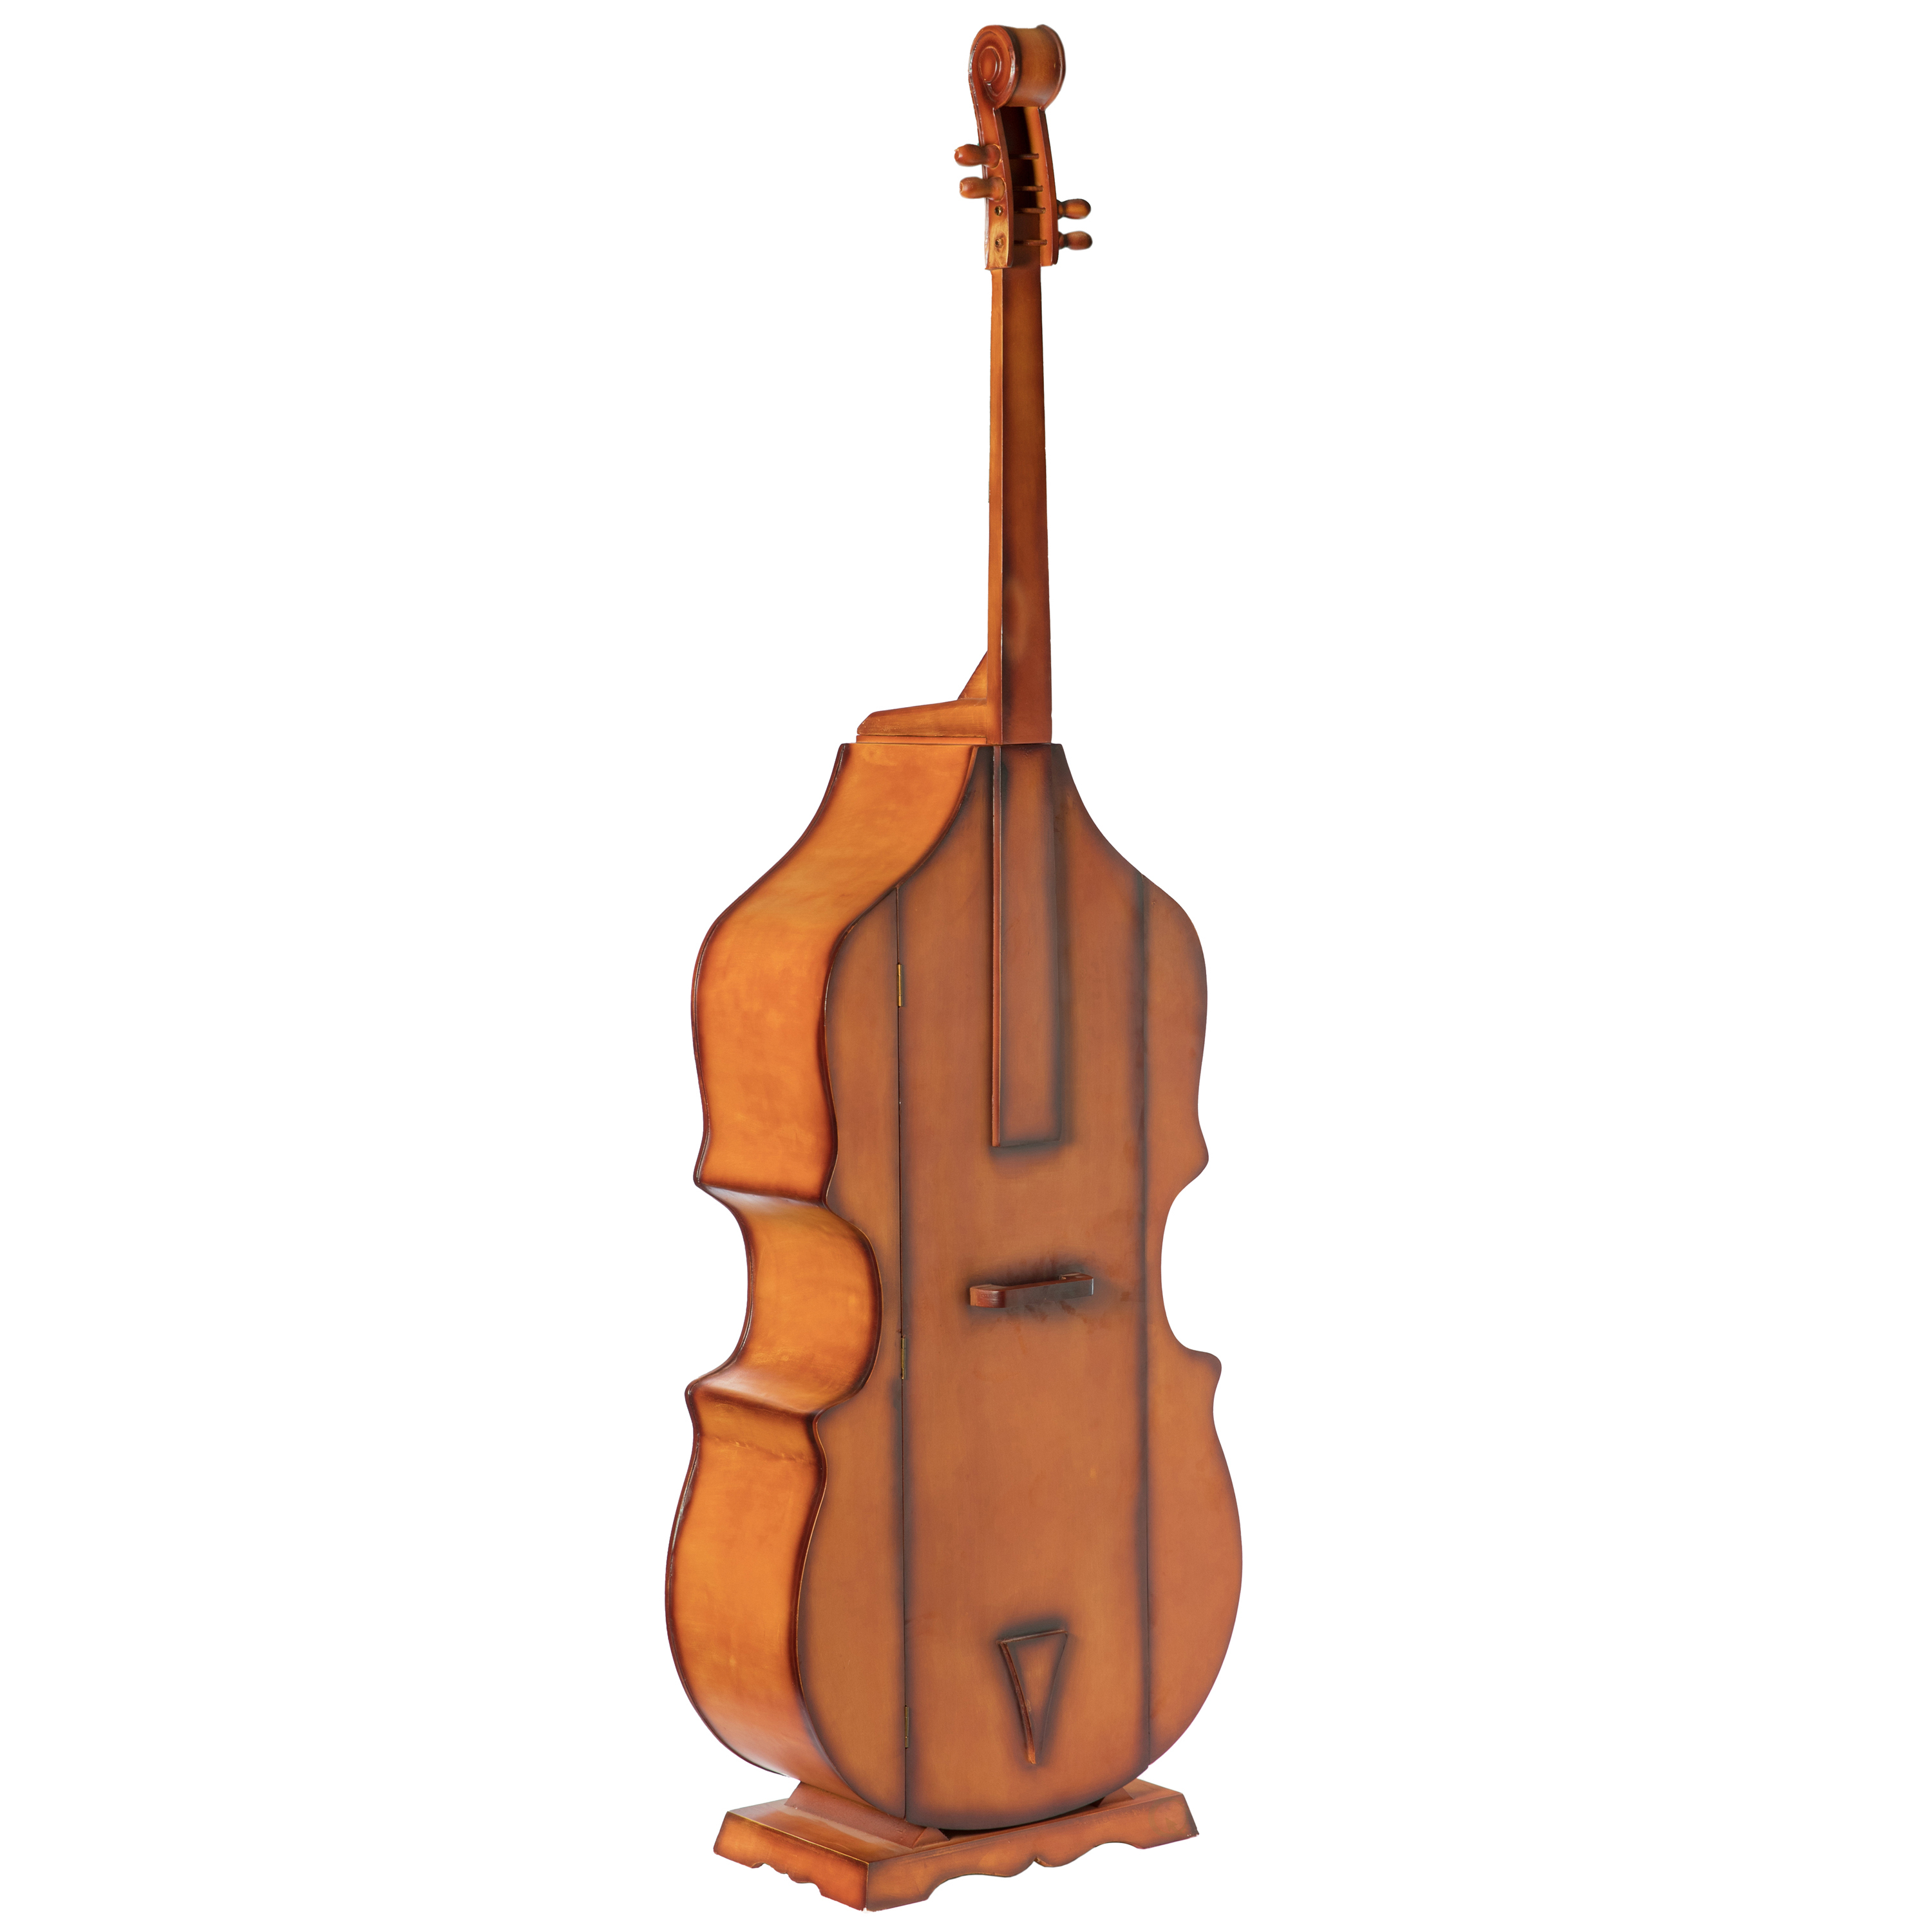 6.5 Feet Tall Violin, 3 Shelf Large Violin Shaped Cabinet With Door